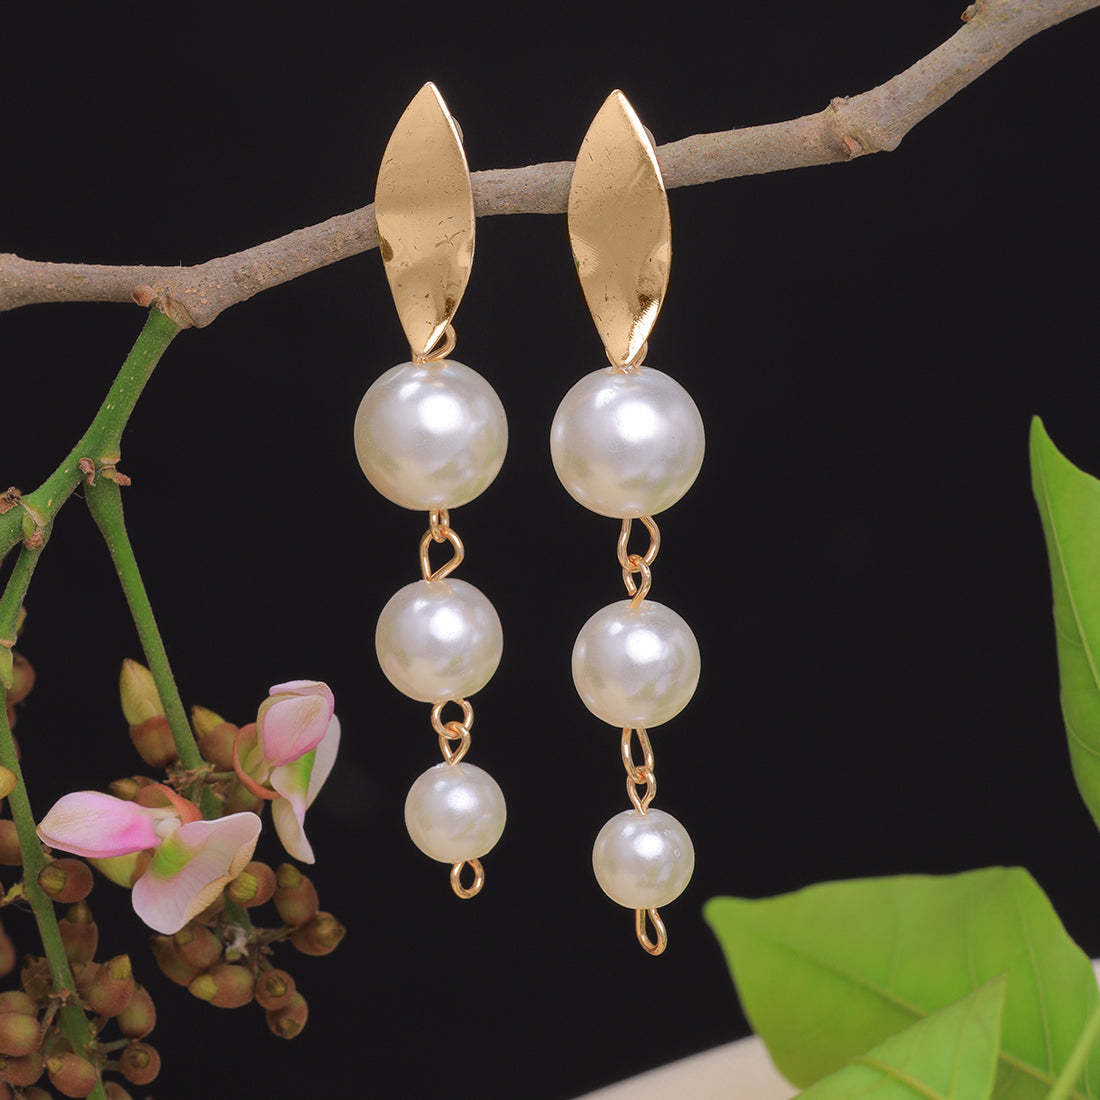 Elegant Gold-Toned Earrings Featuring A Trio Of Lustrous Pearl Drops.